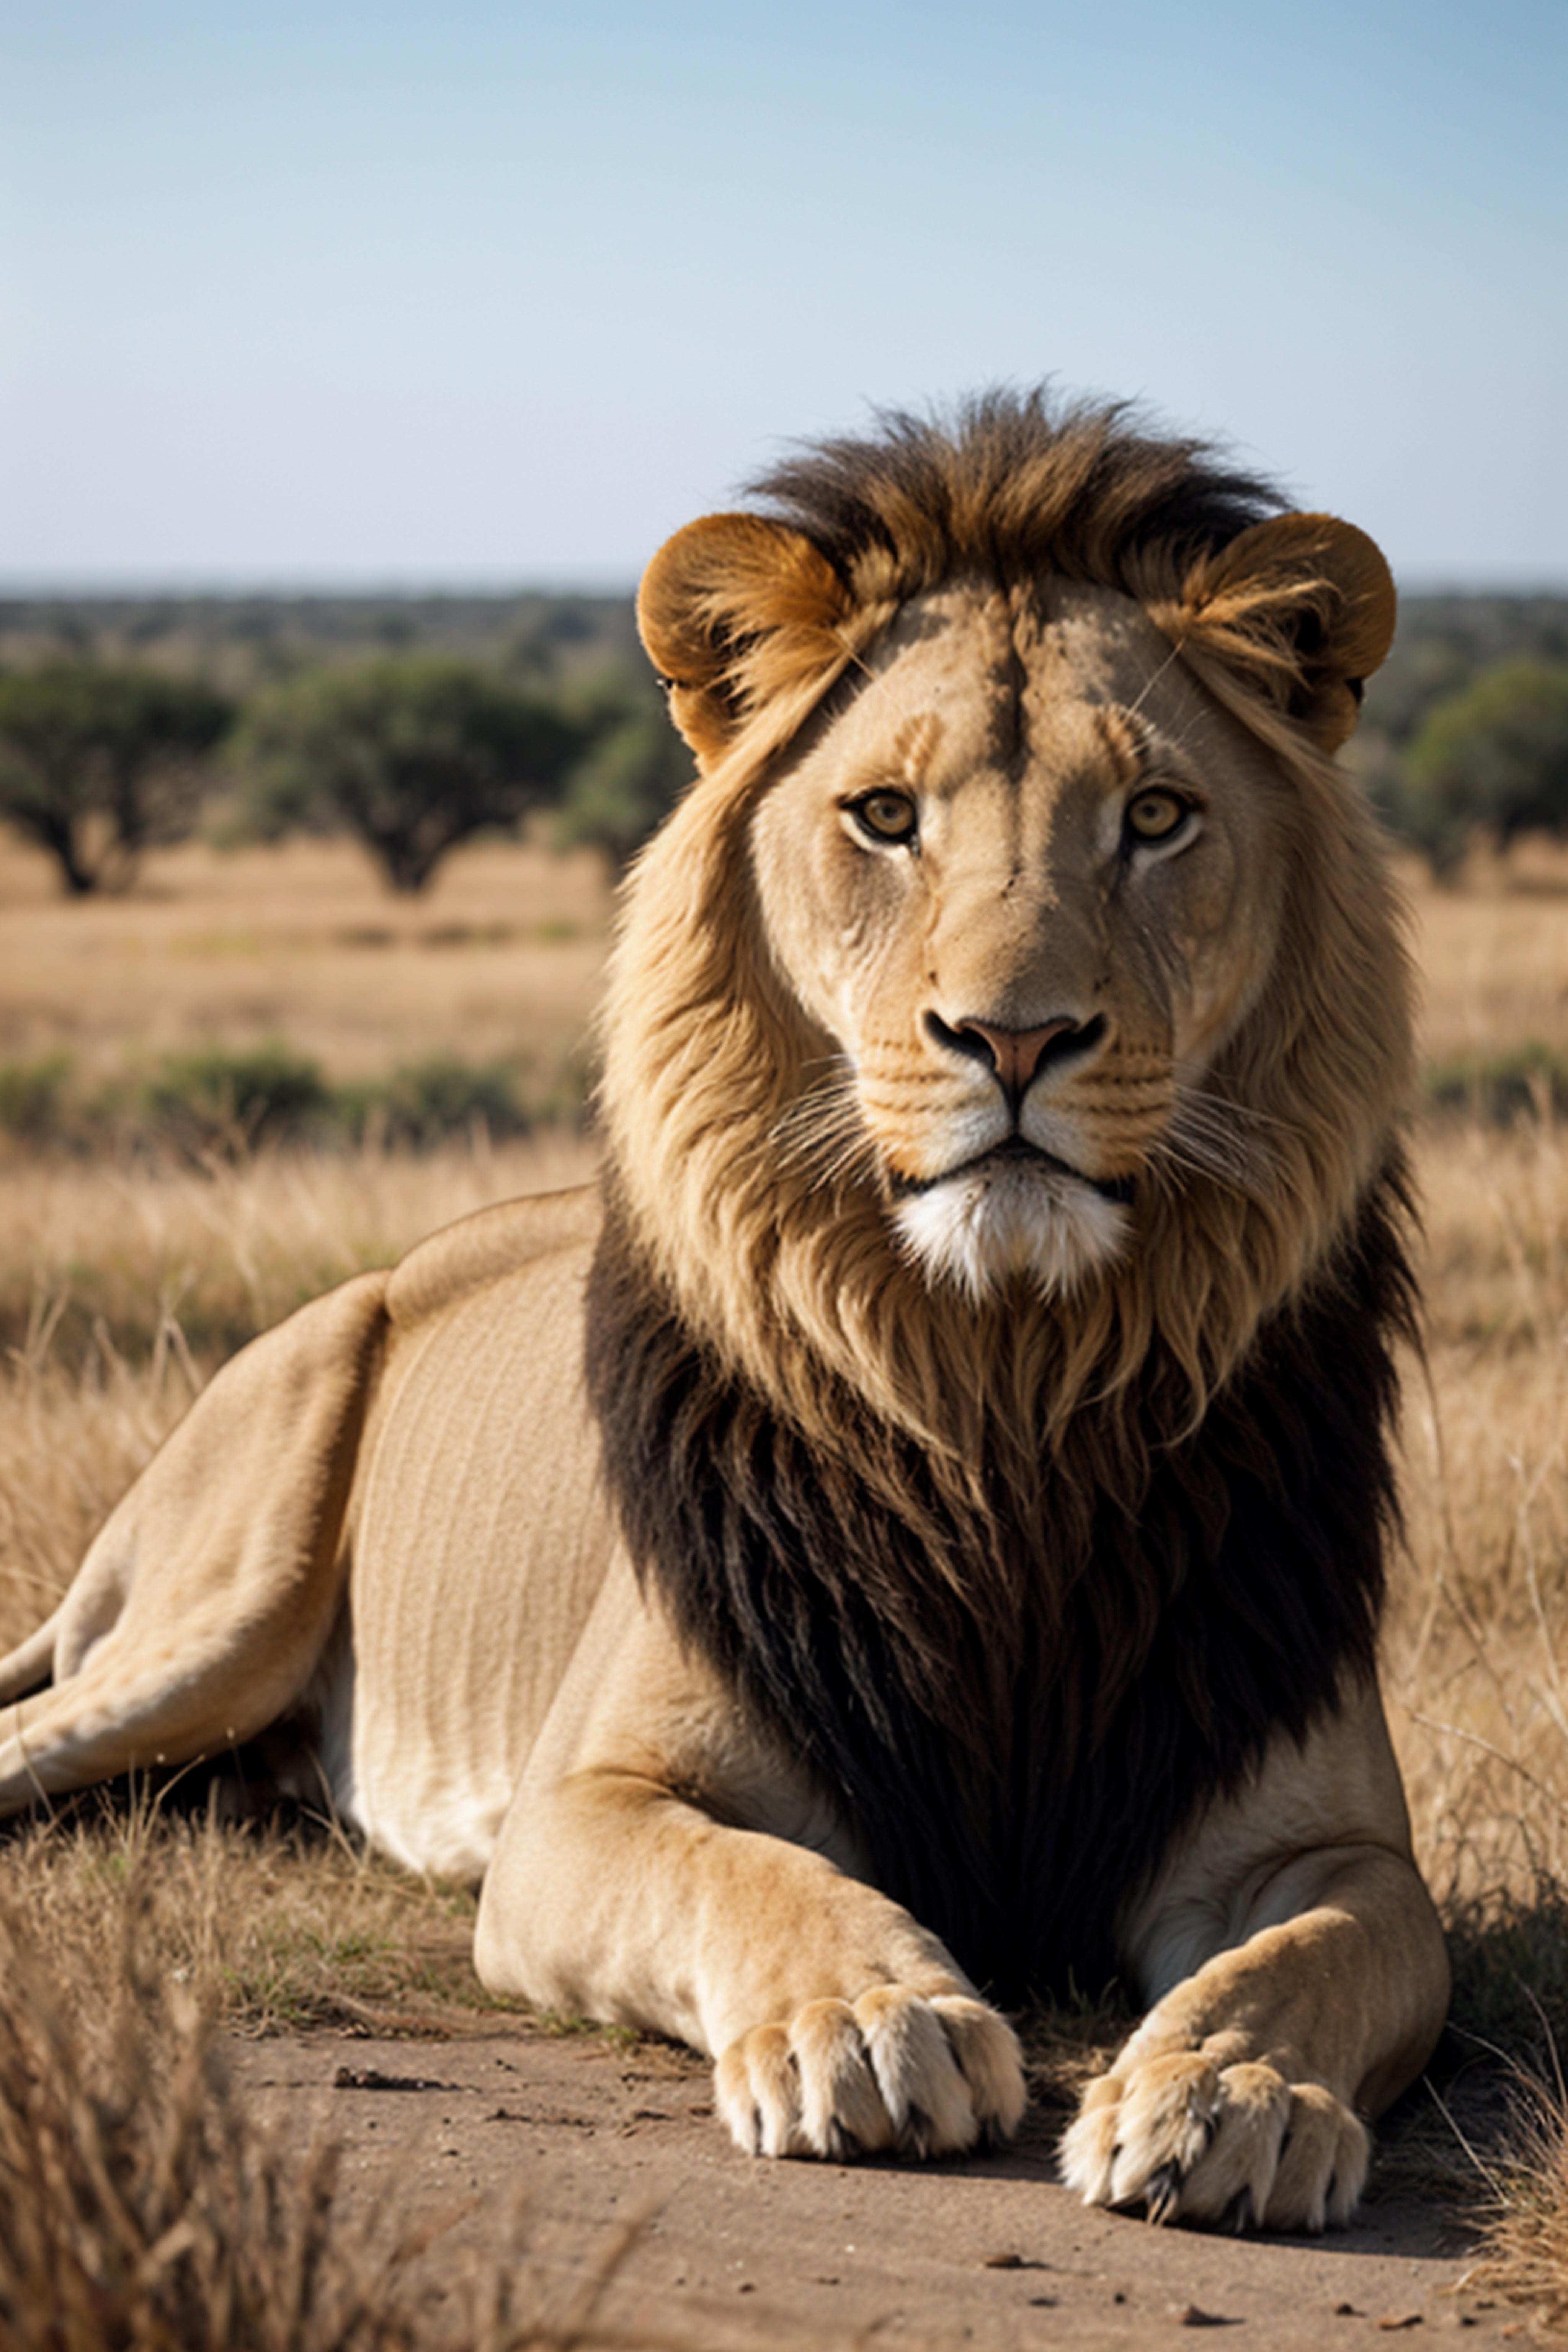 A close-up of a majestic lion in a dry grass field.